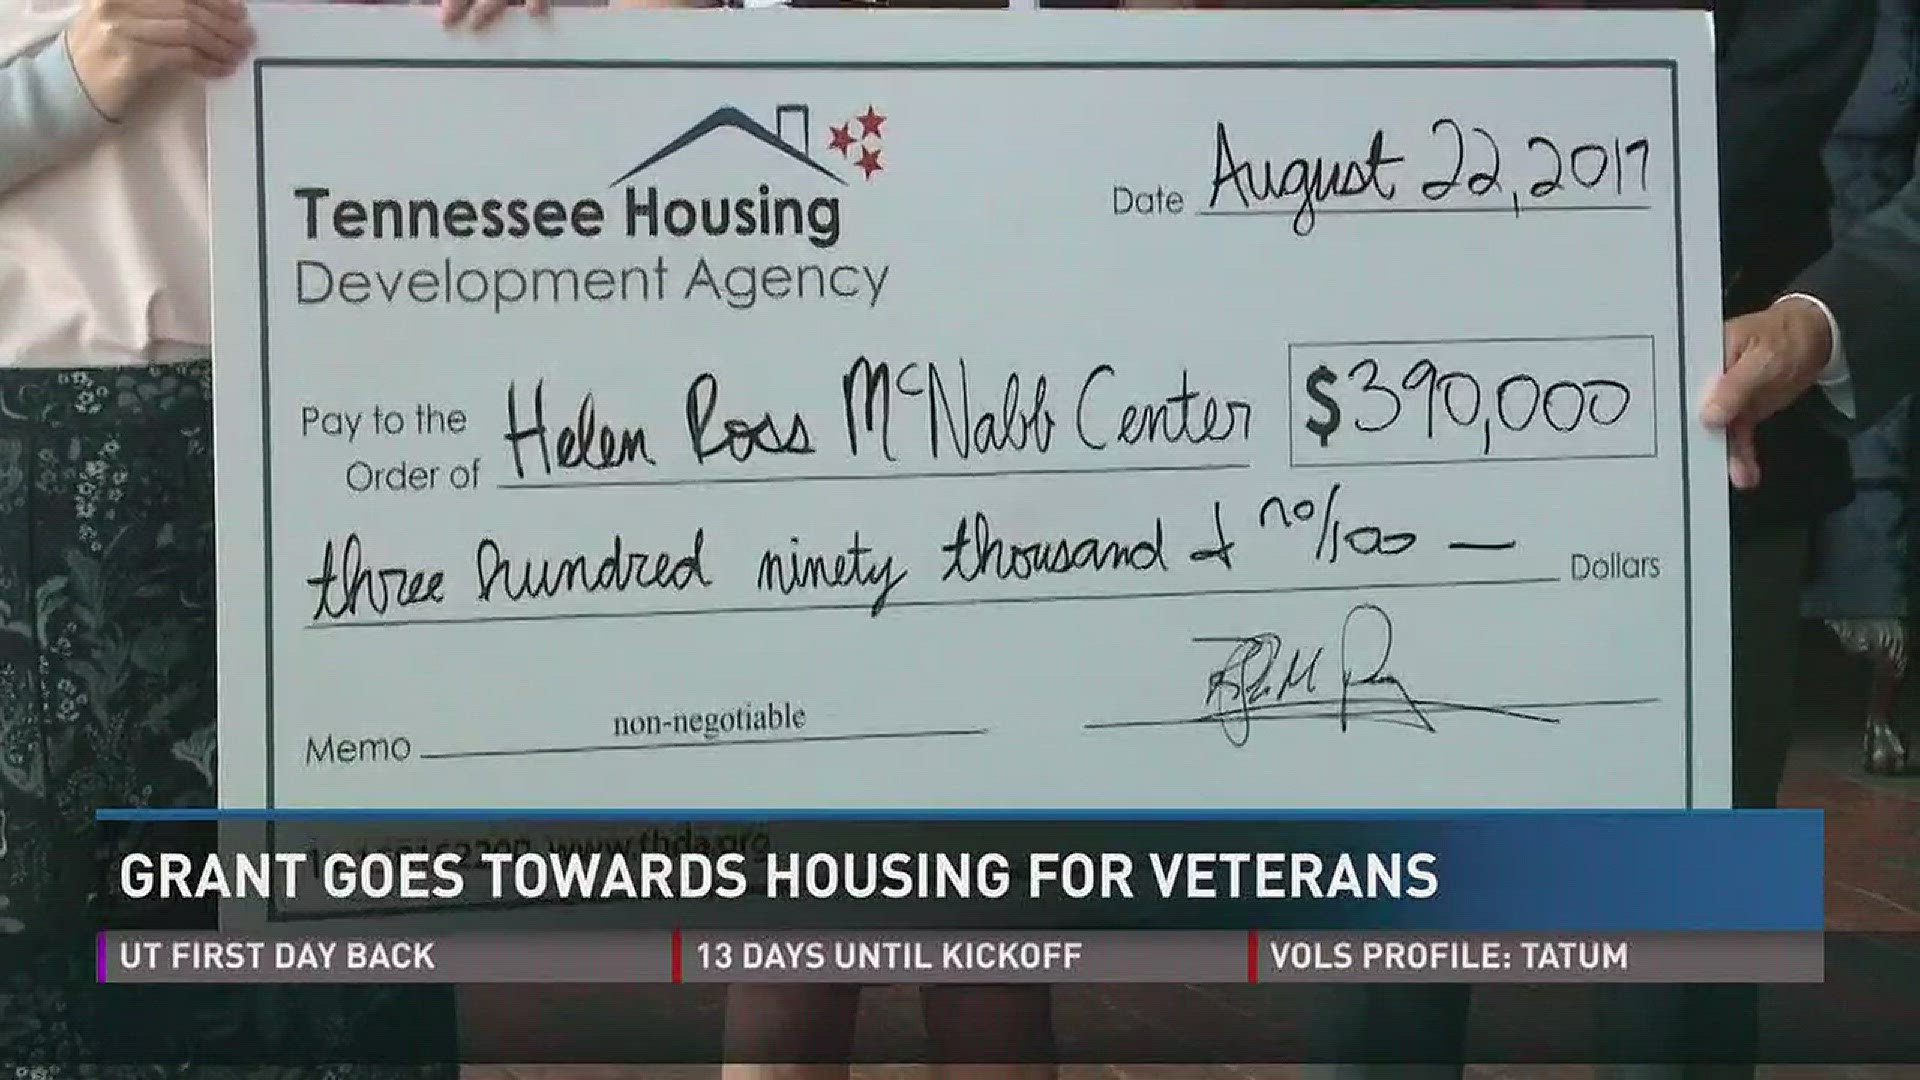 Aug. 22, 2017: The Helen Ross McNabb Center will use a $390,000 grant to provide 10 veterans with apartments.